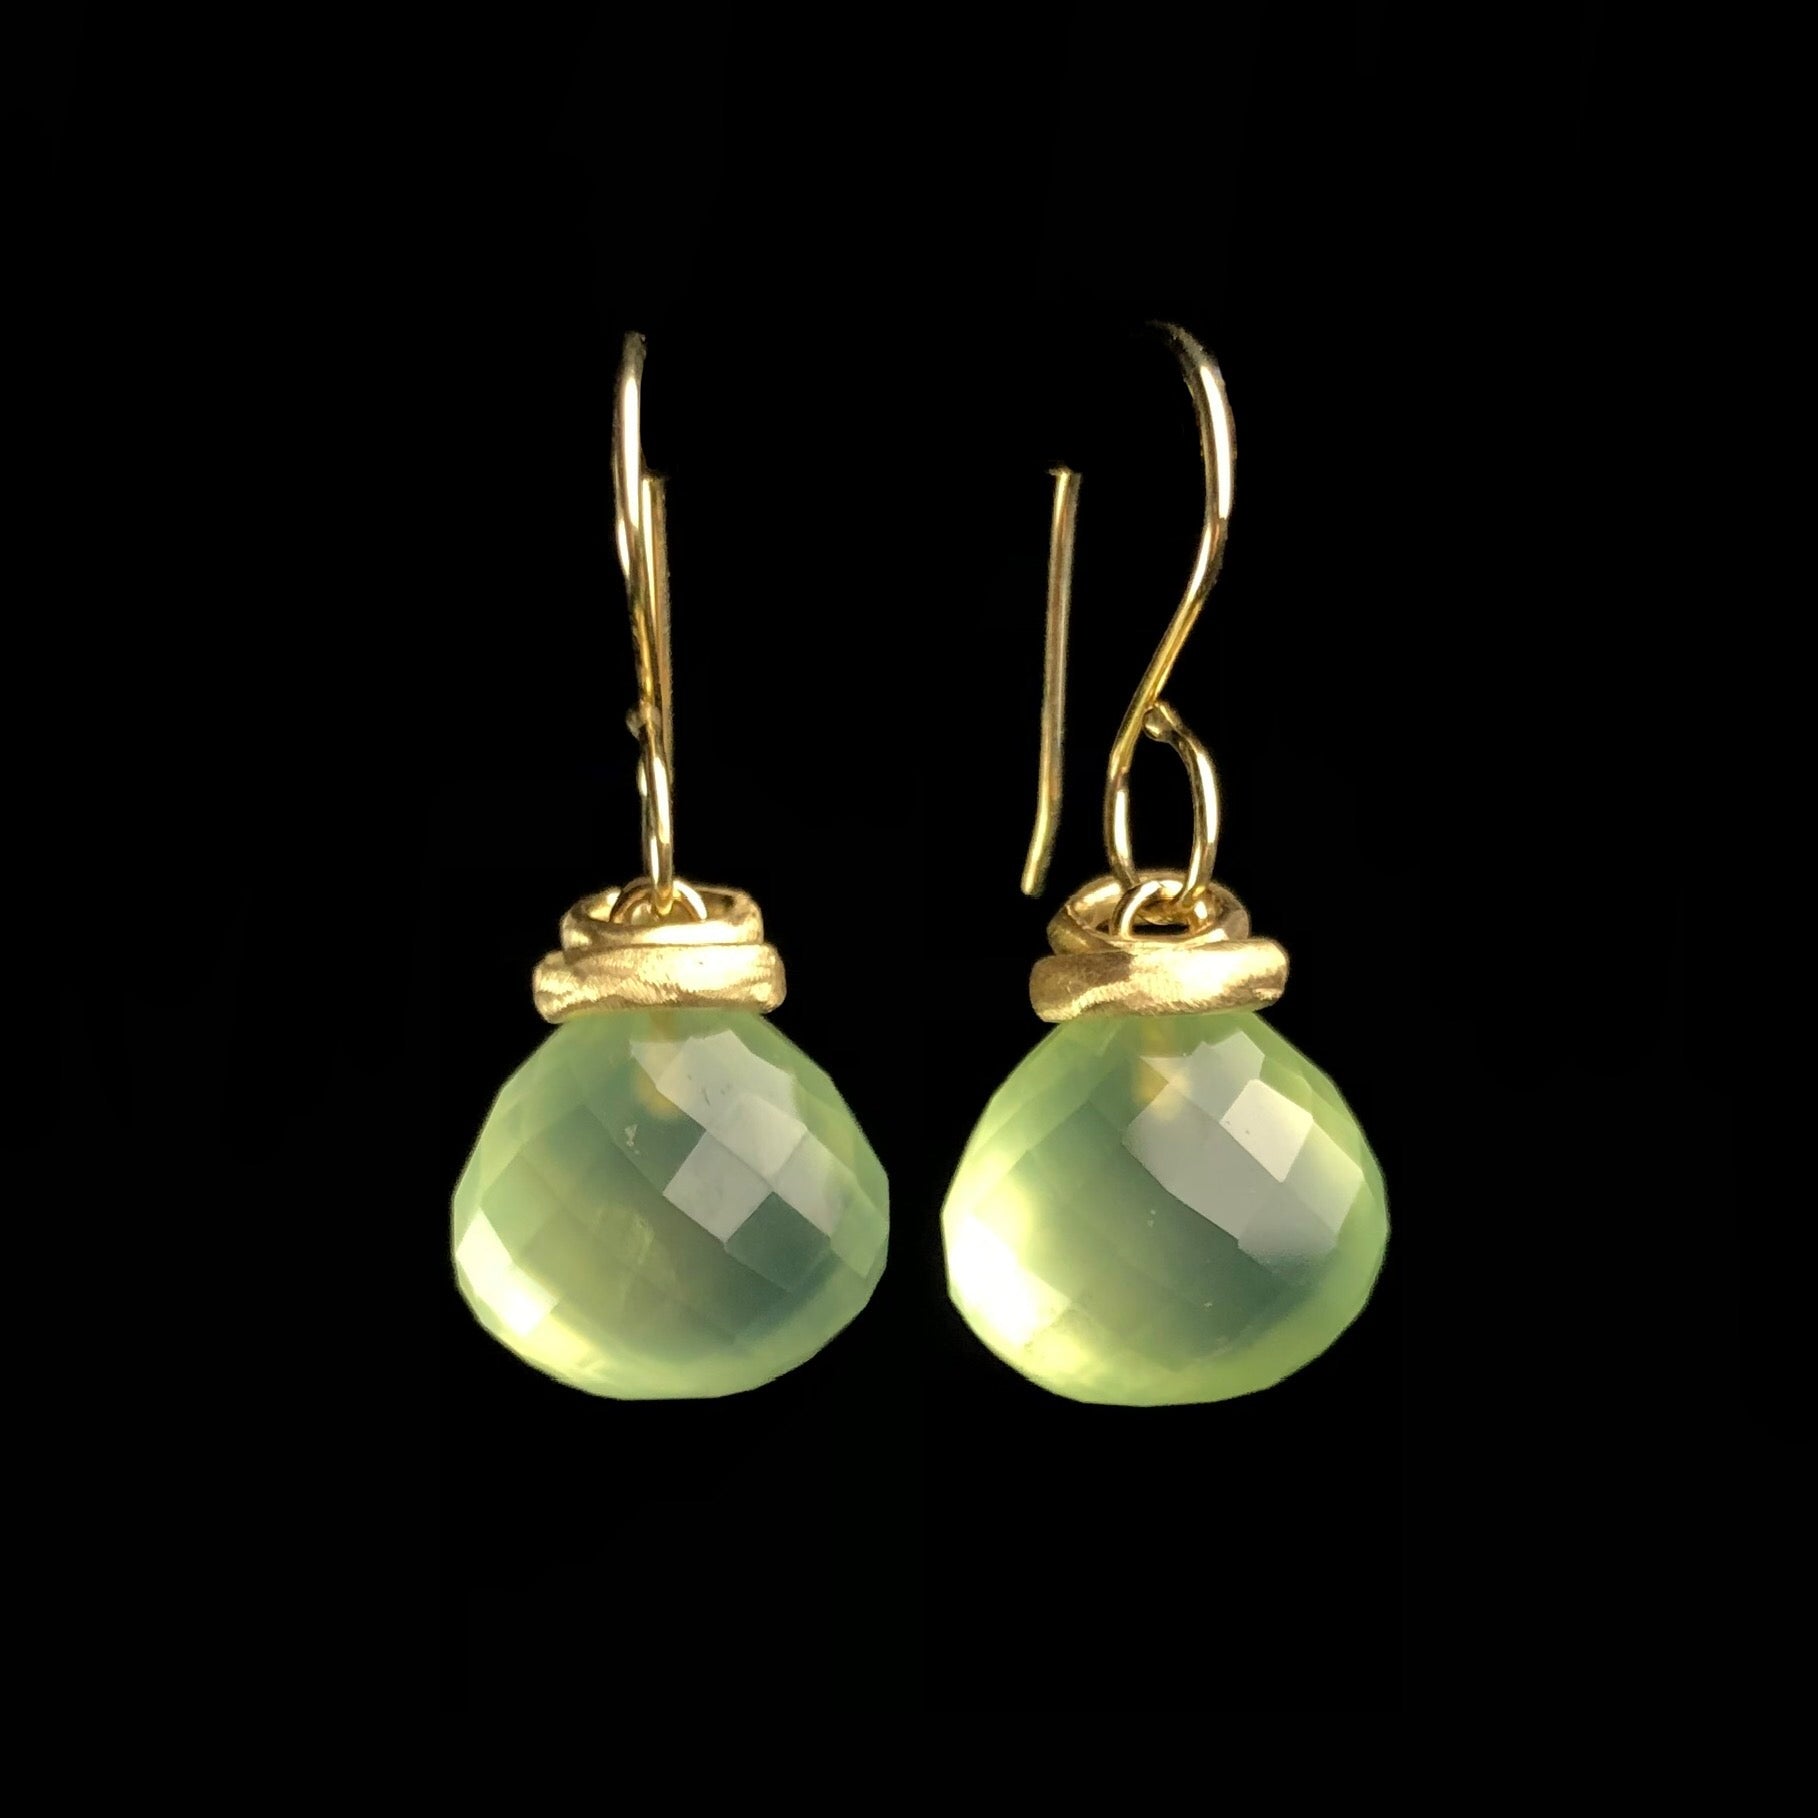 Light green translucent stones hanging from gold earring wires